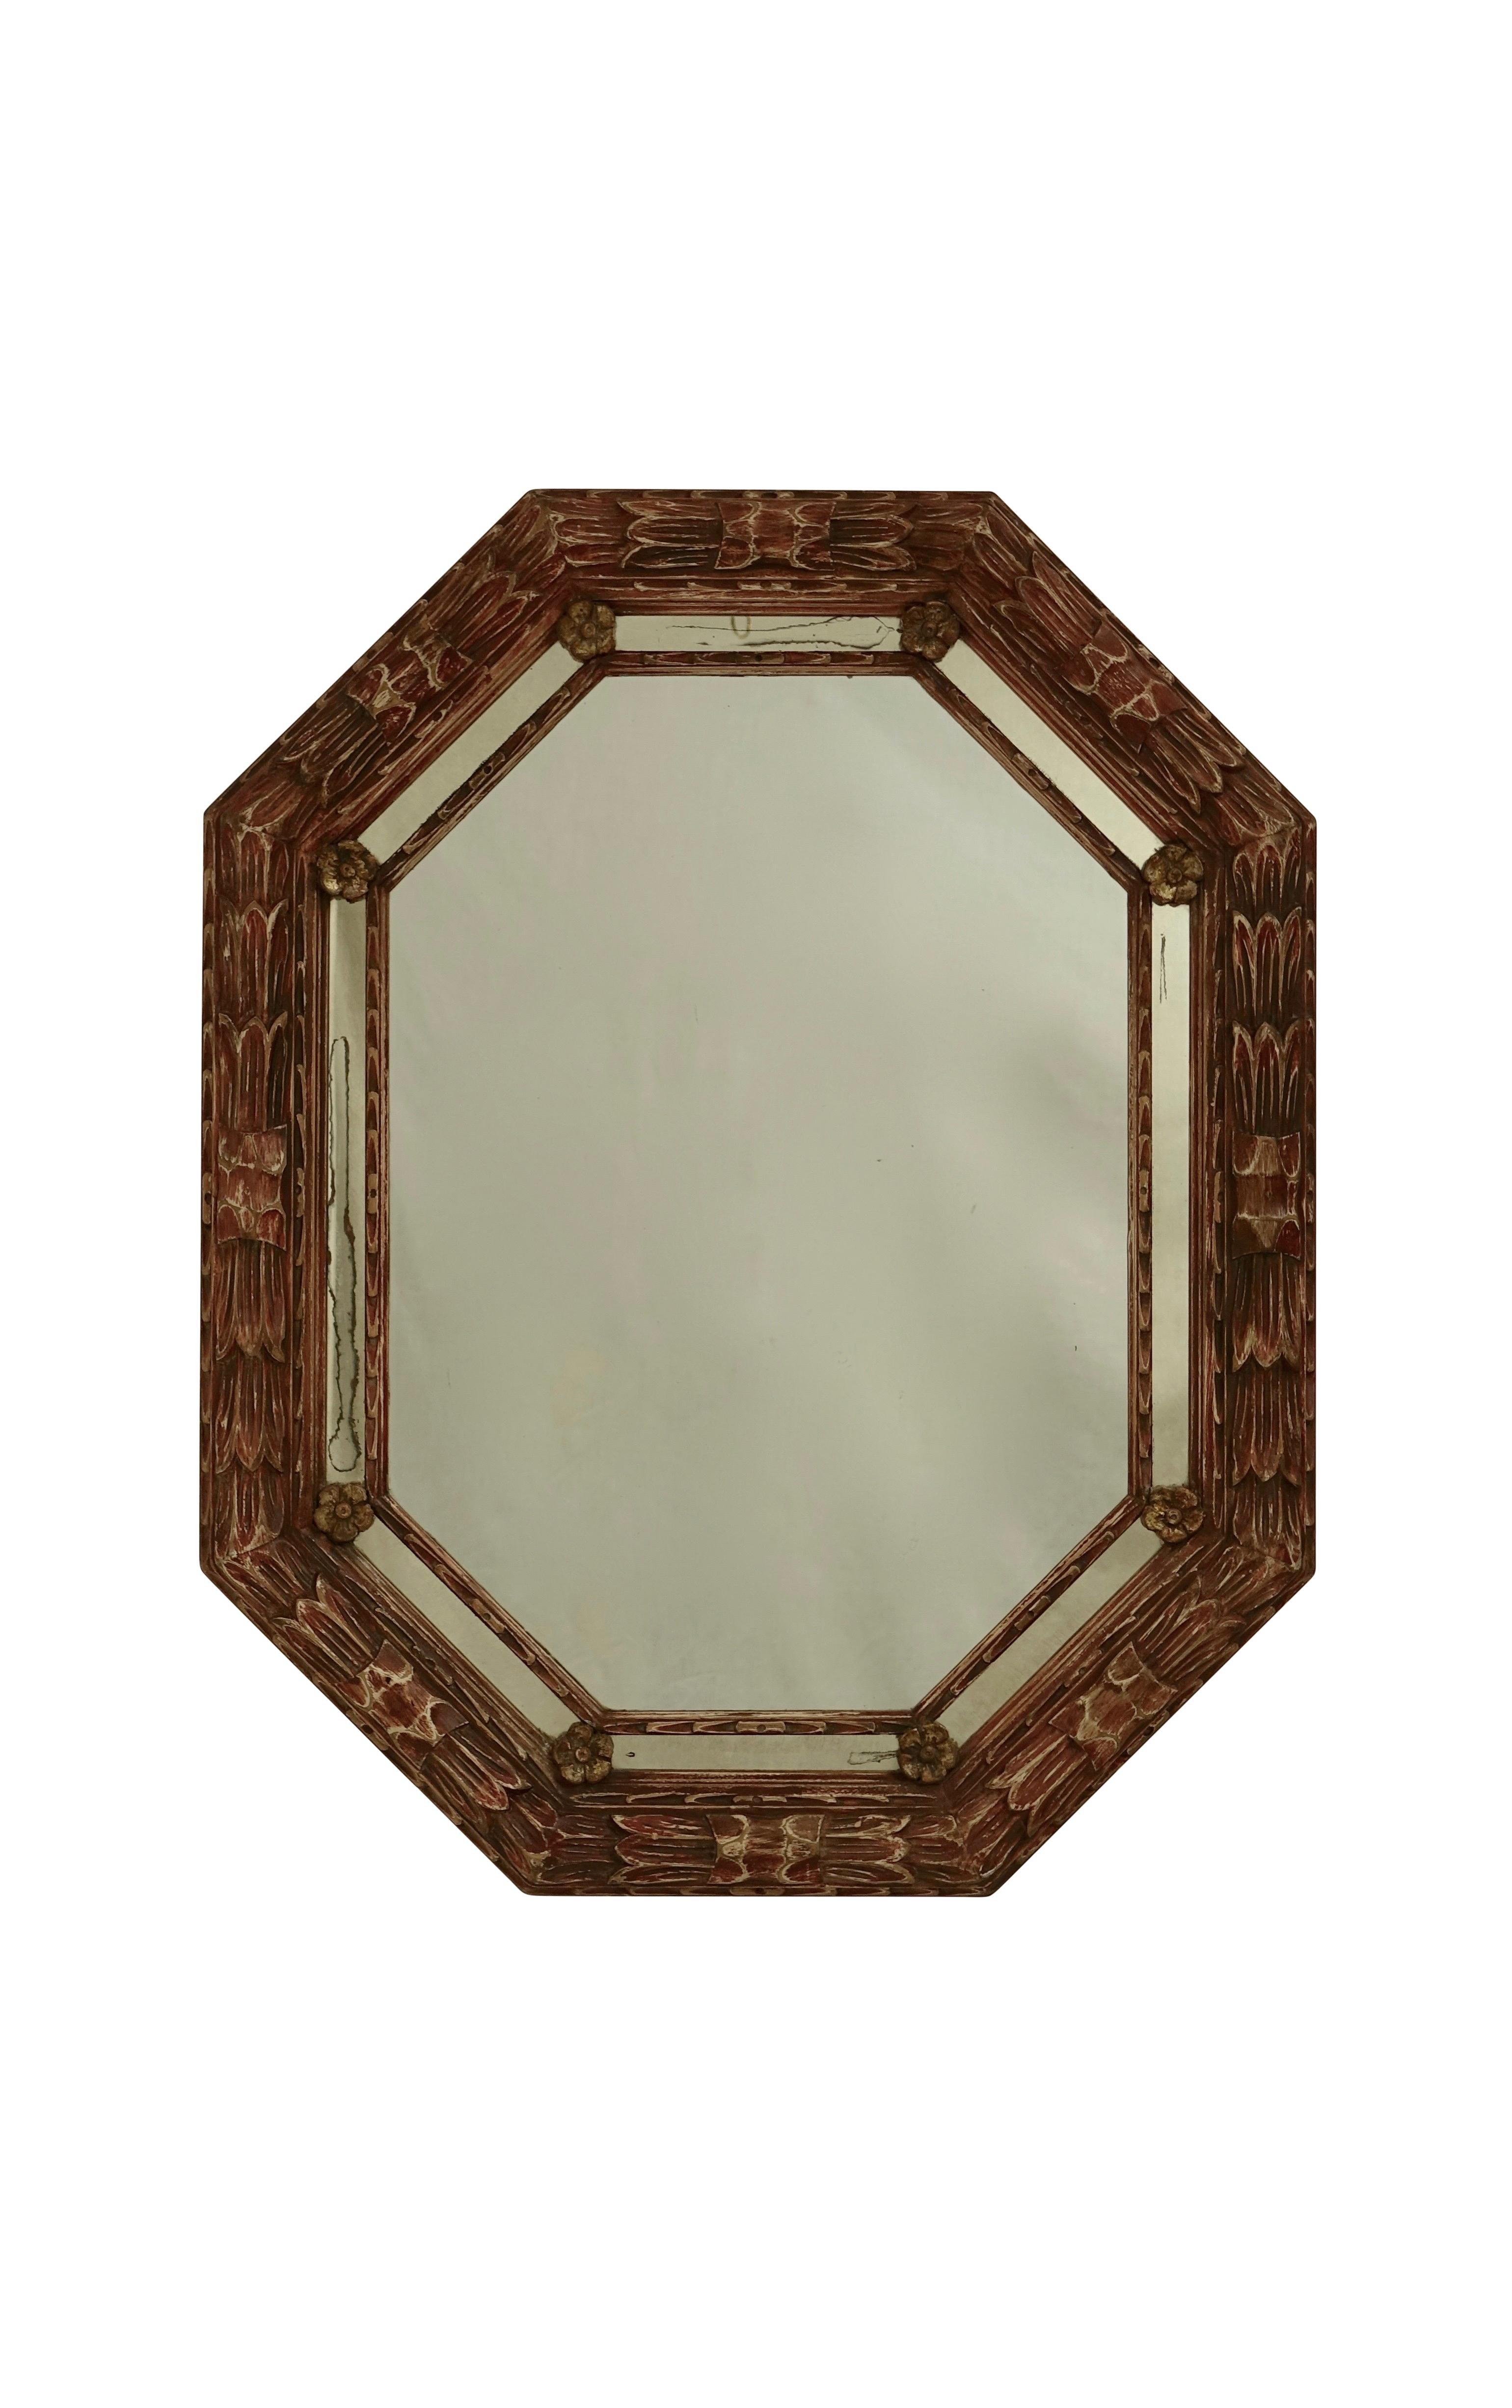 European Carved and Painted Octagonal Mirror